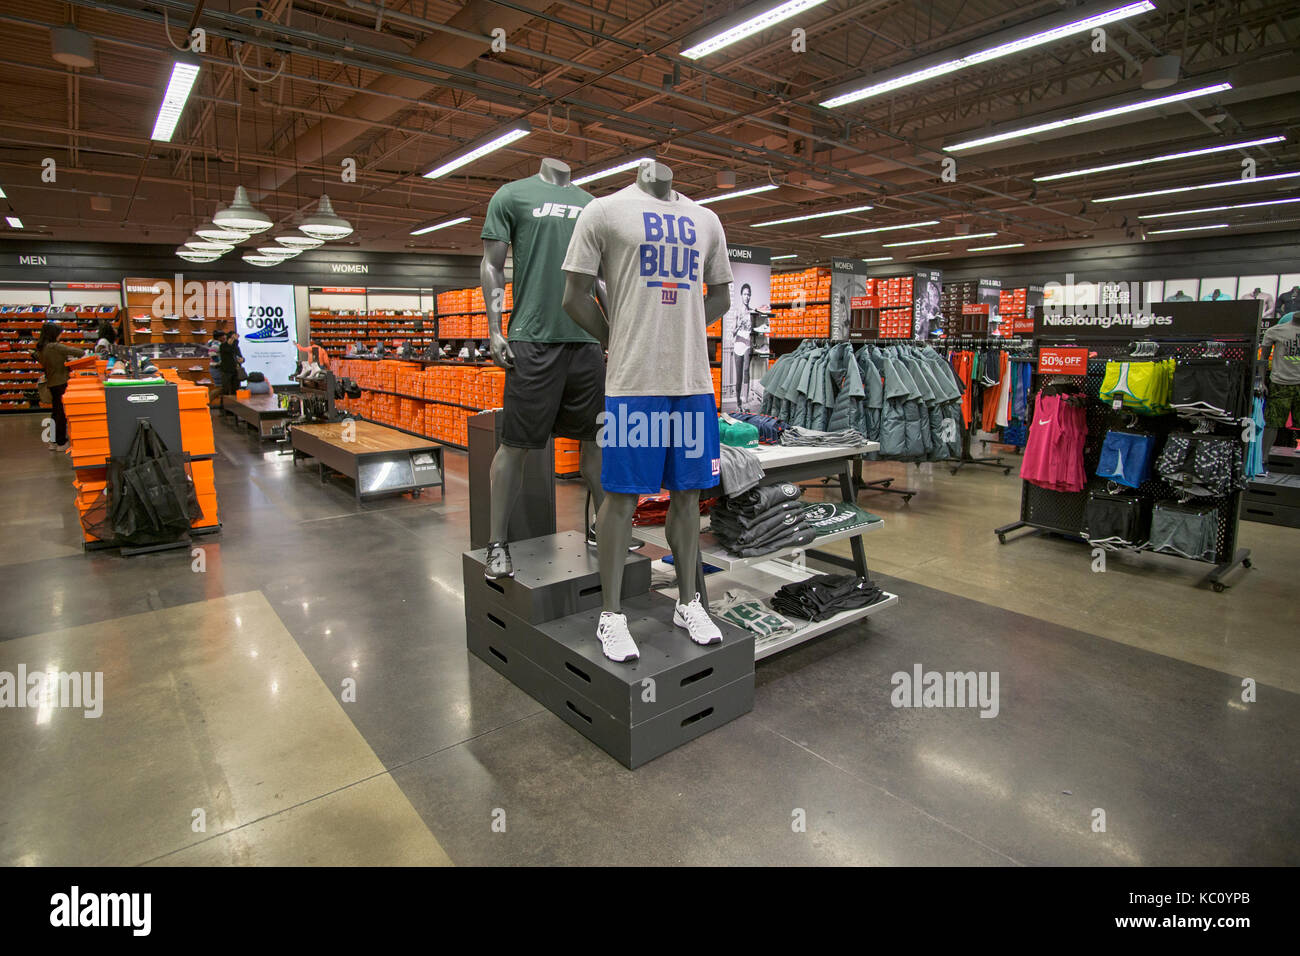 The interior of the Nike Factory Store at the Tanger Outlet Mall in Deer Park Long Island, New York. Stock Photo